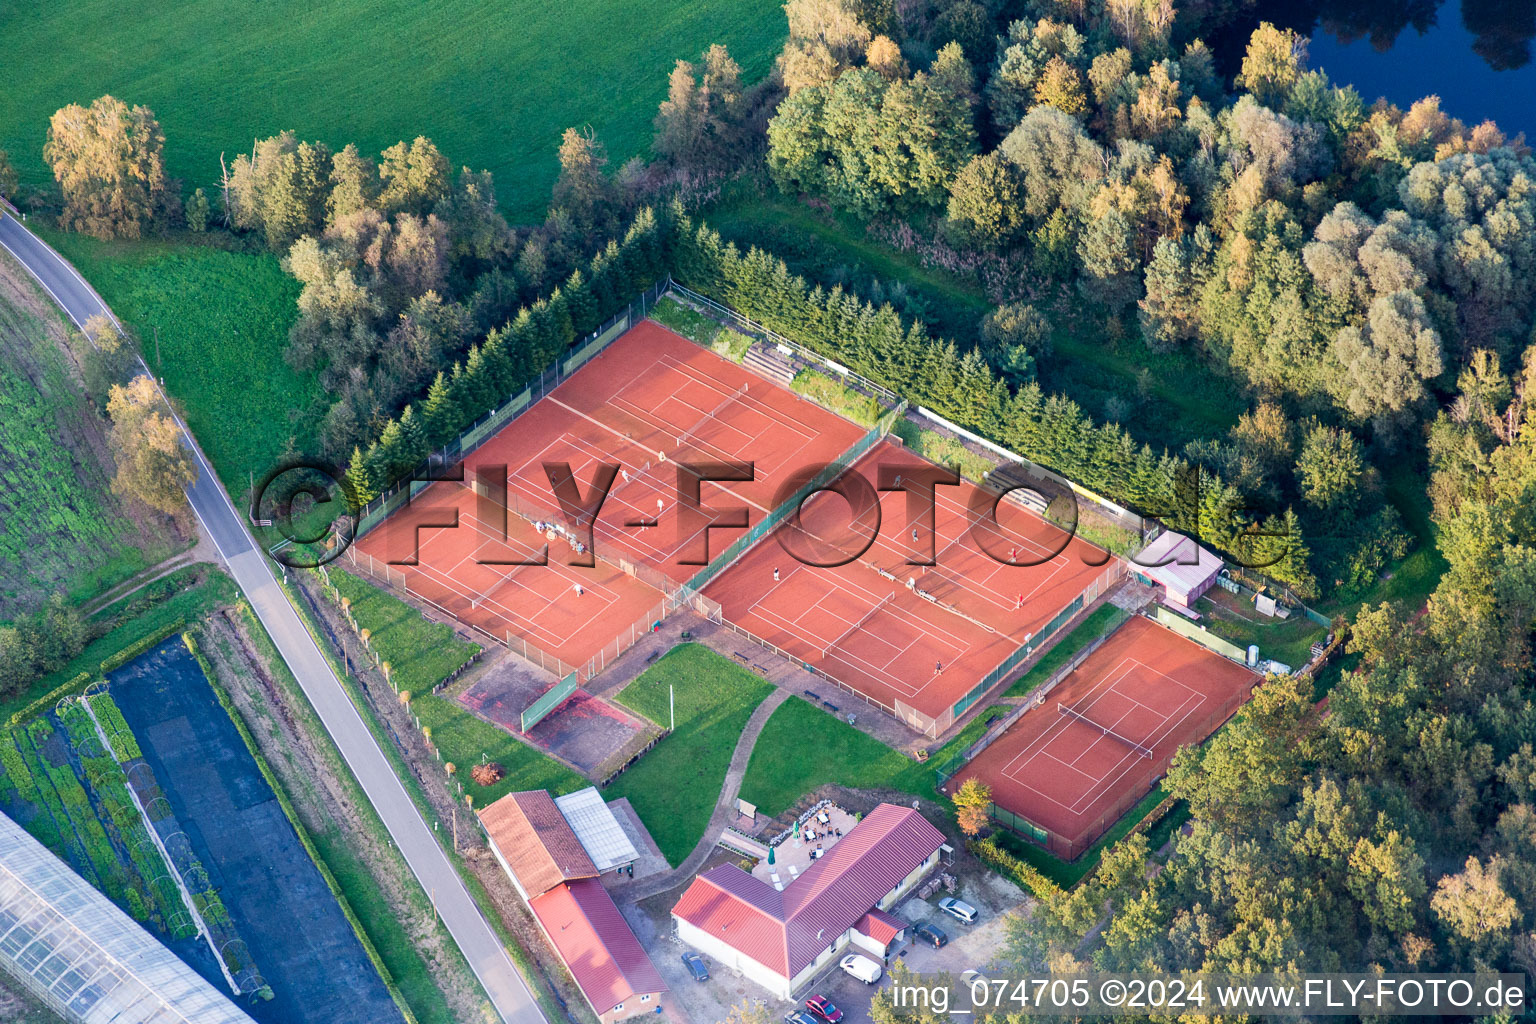 Tennis court sports field of TC Bienwald in Steinfeld in the state Rhineland-Palatinate, Germany